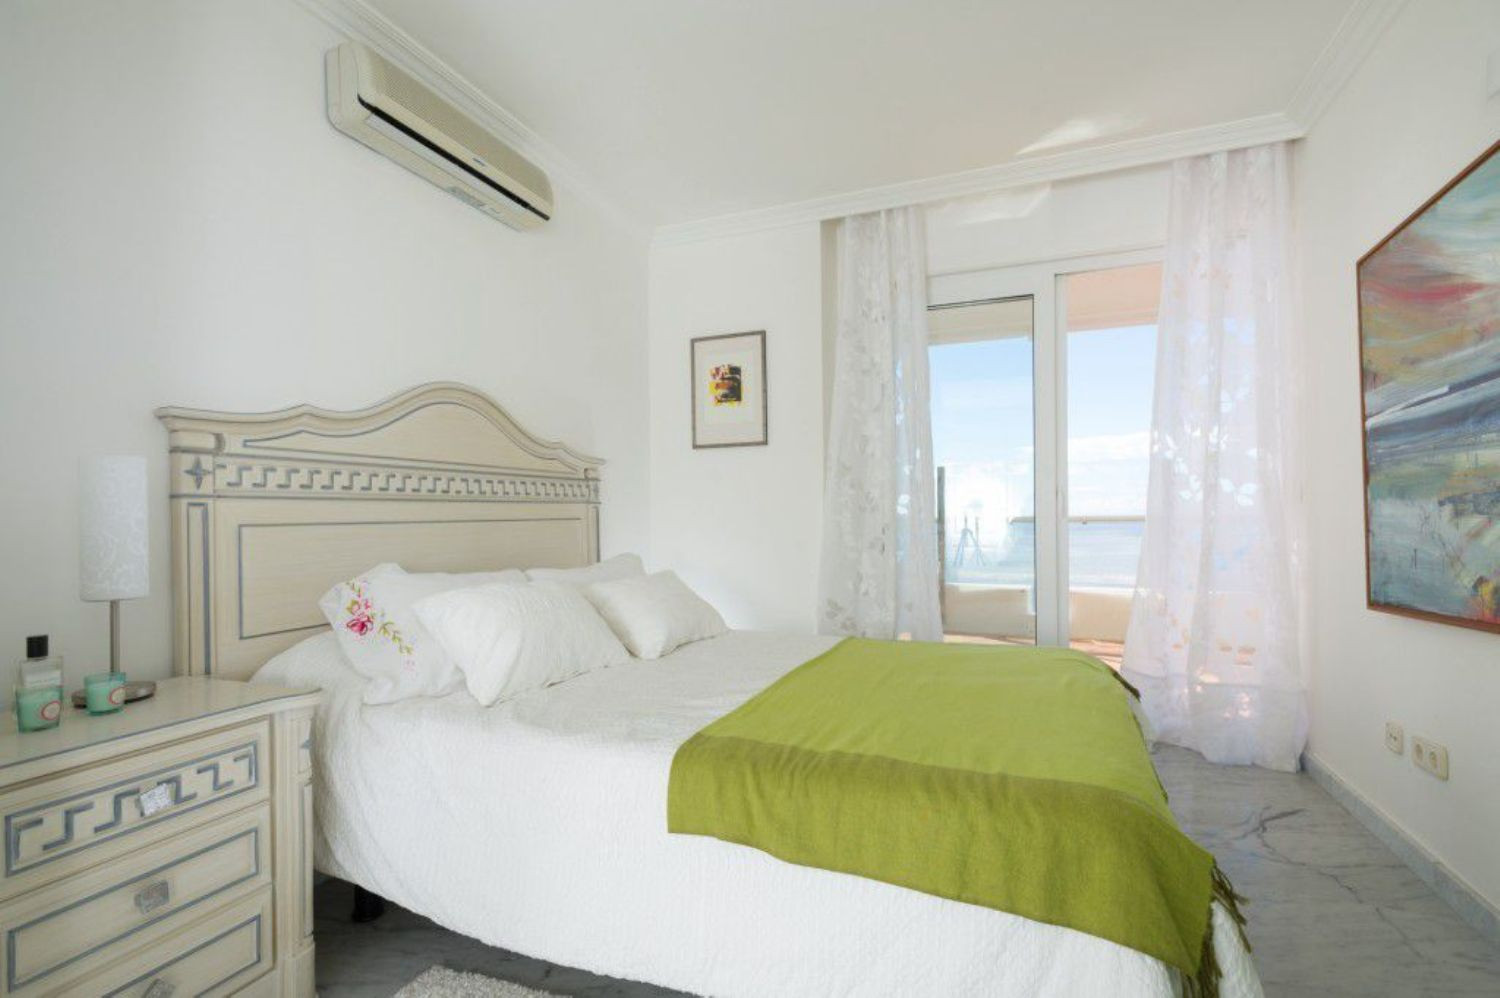 Flat for sale in Rio Real, Marbella East